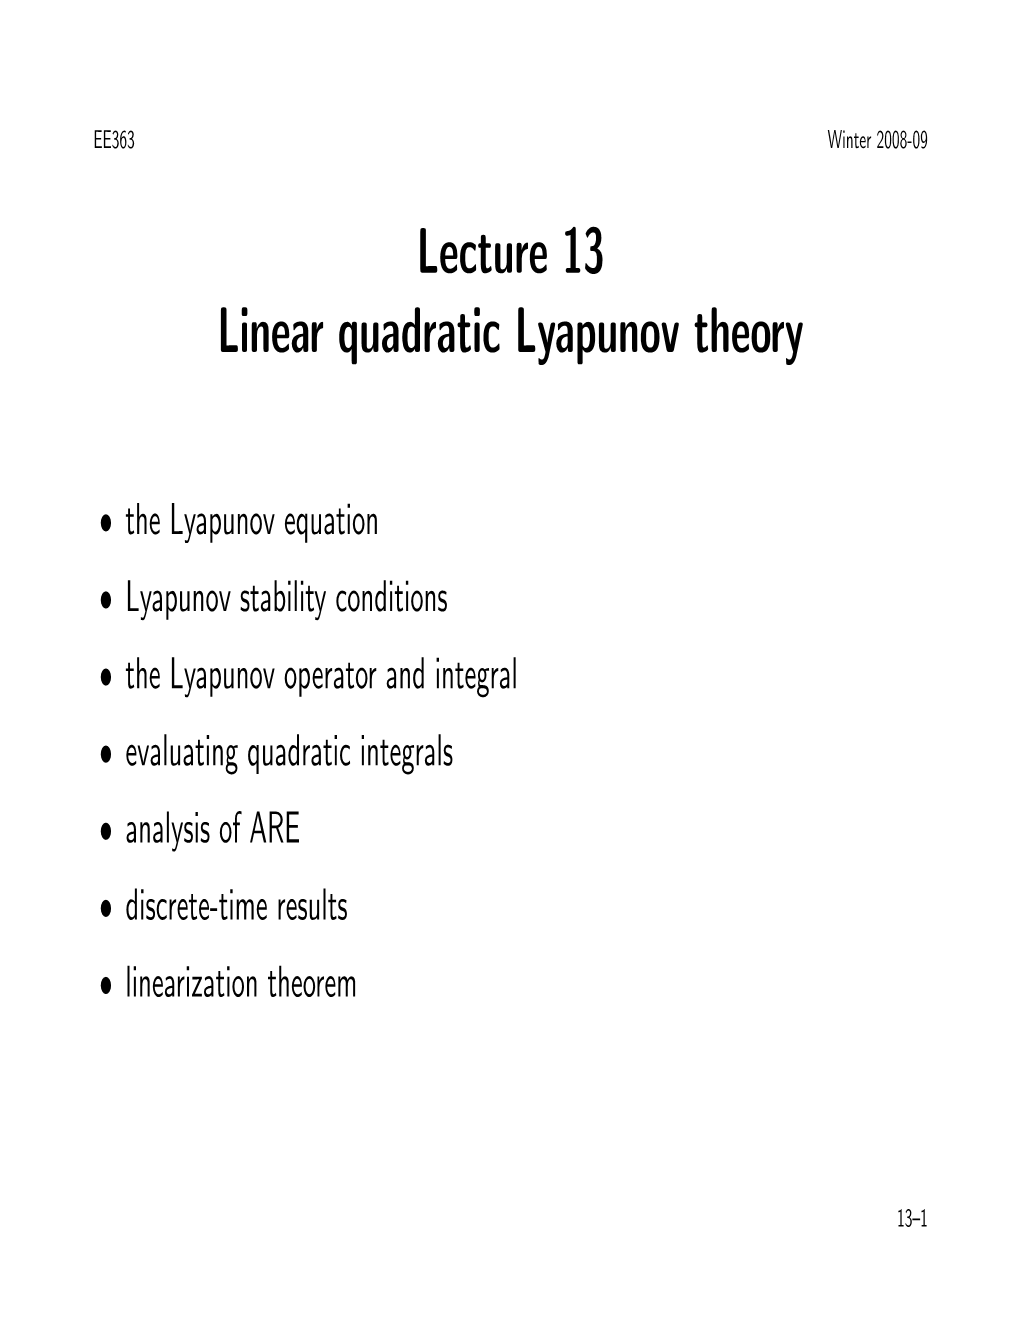 Lecture 13 Linear Quadratic Lyapunov Theory